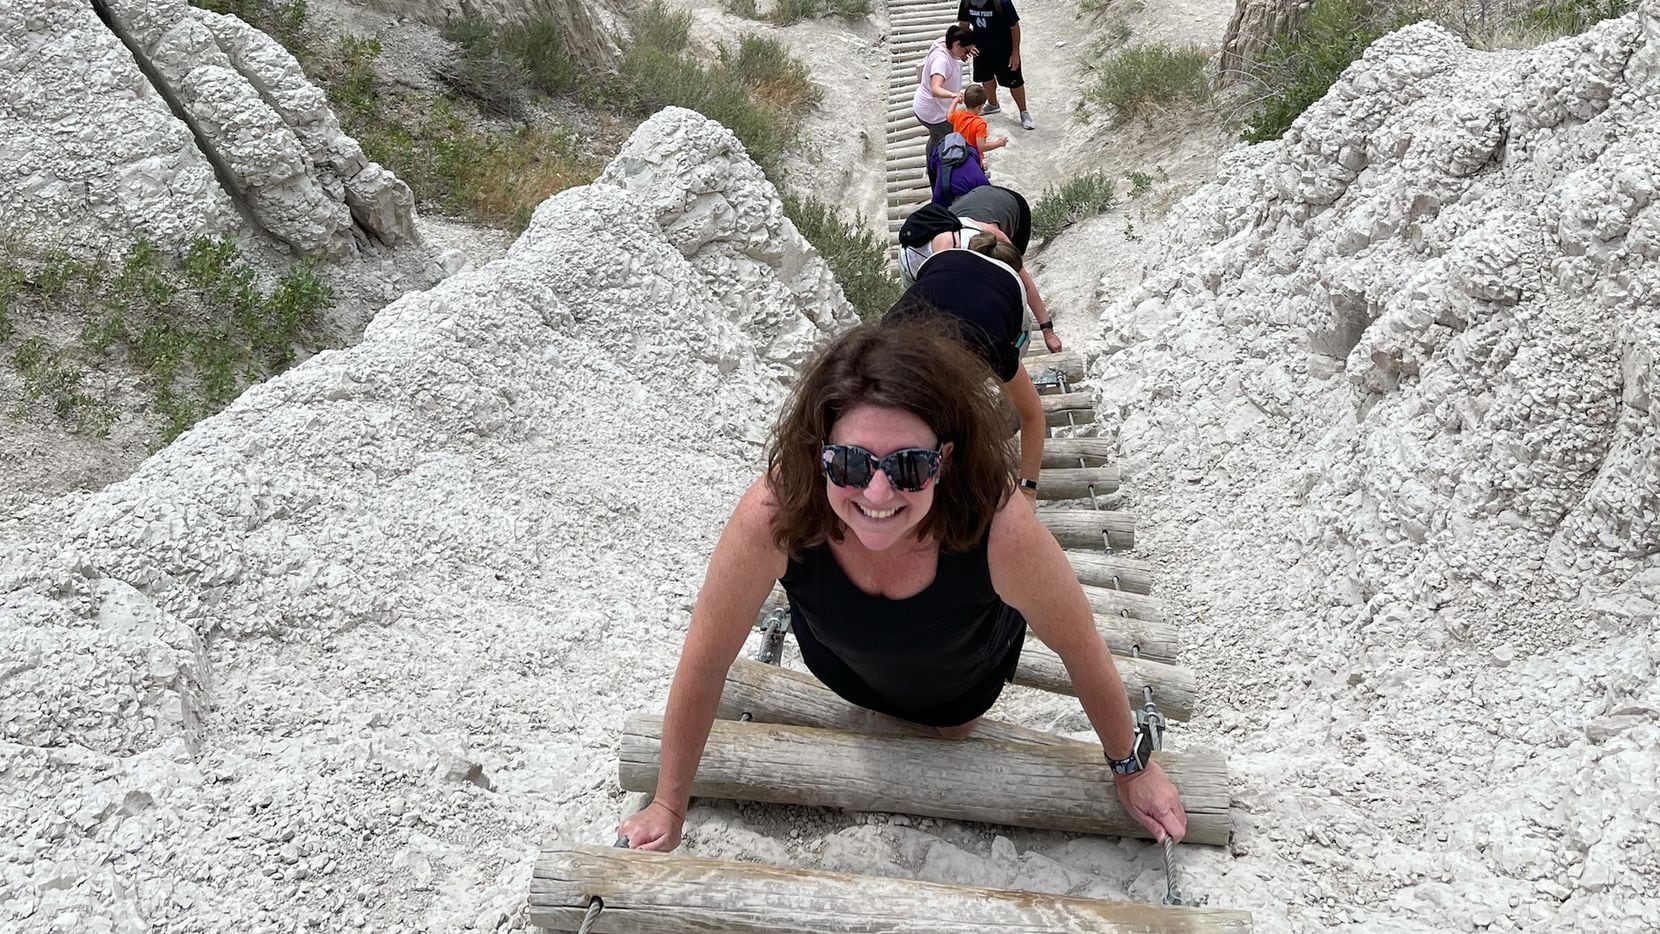 Tyra climbs down a 50-foot ladder along the Notch Trail in Badlands National Park.